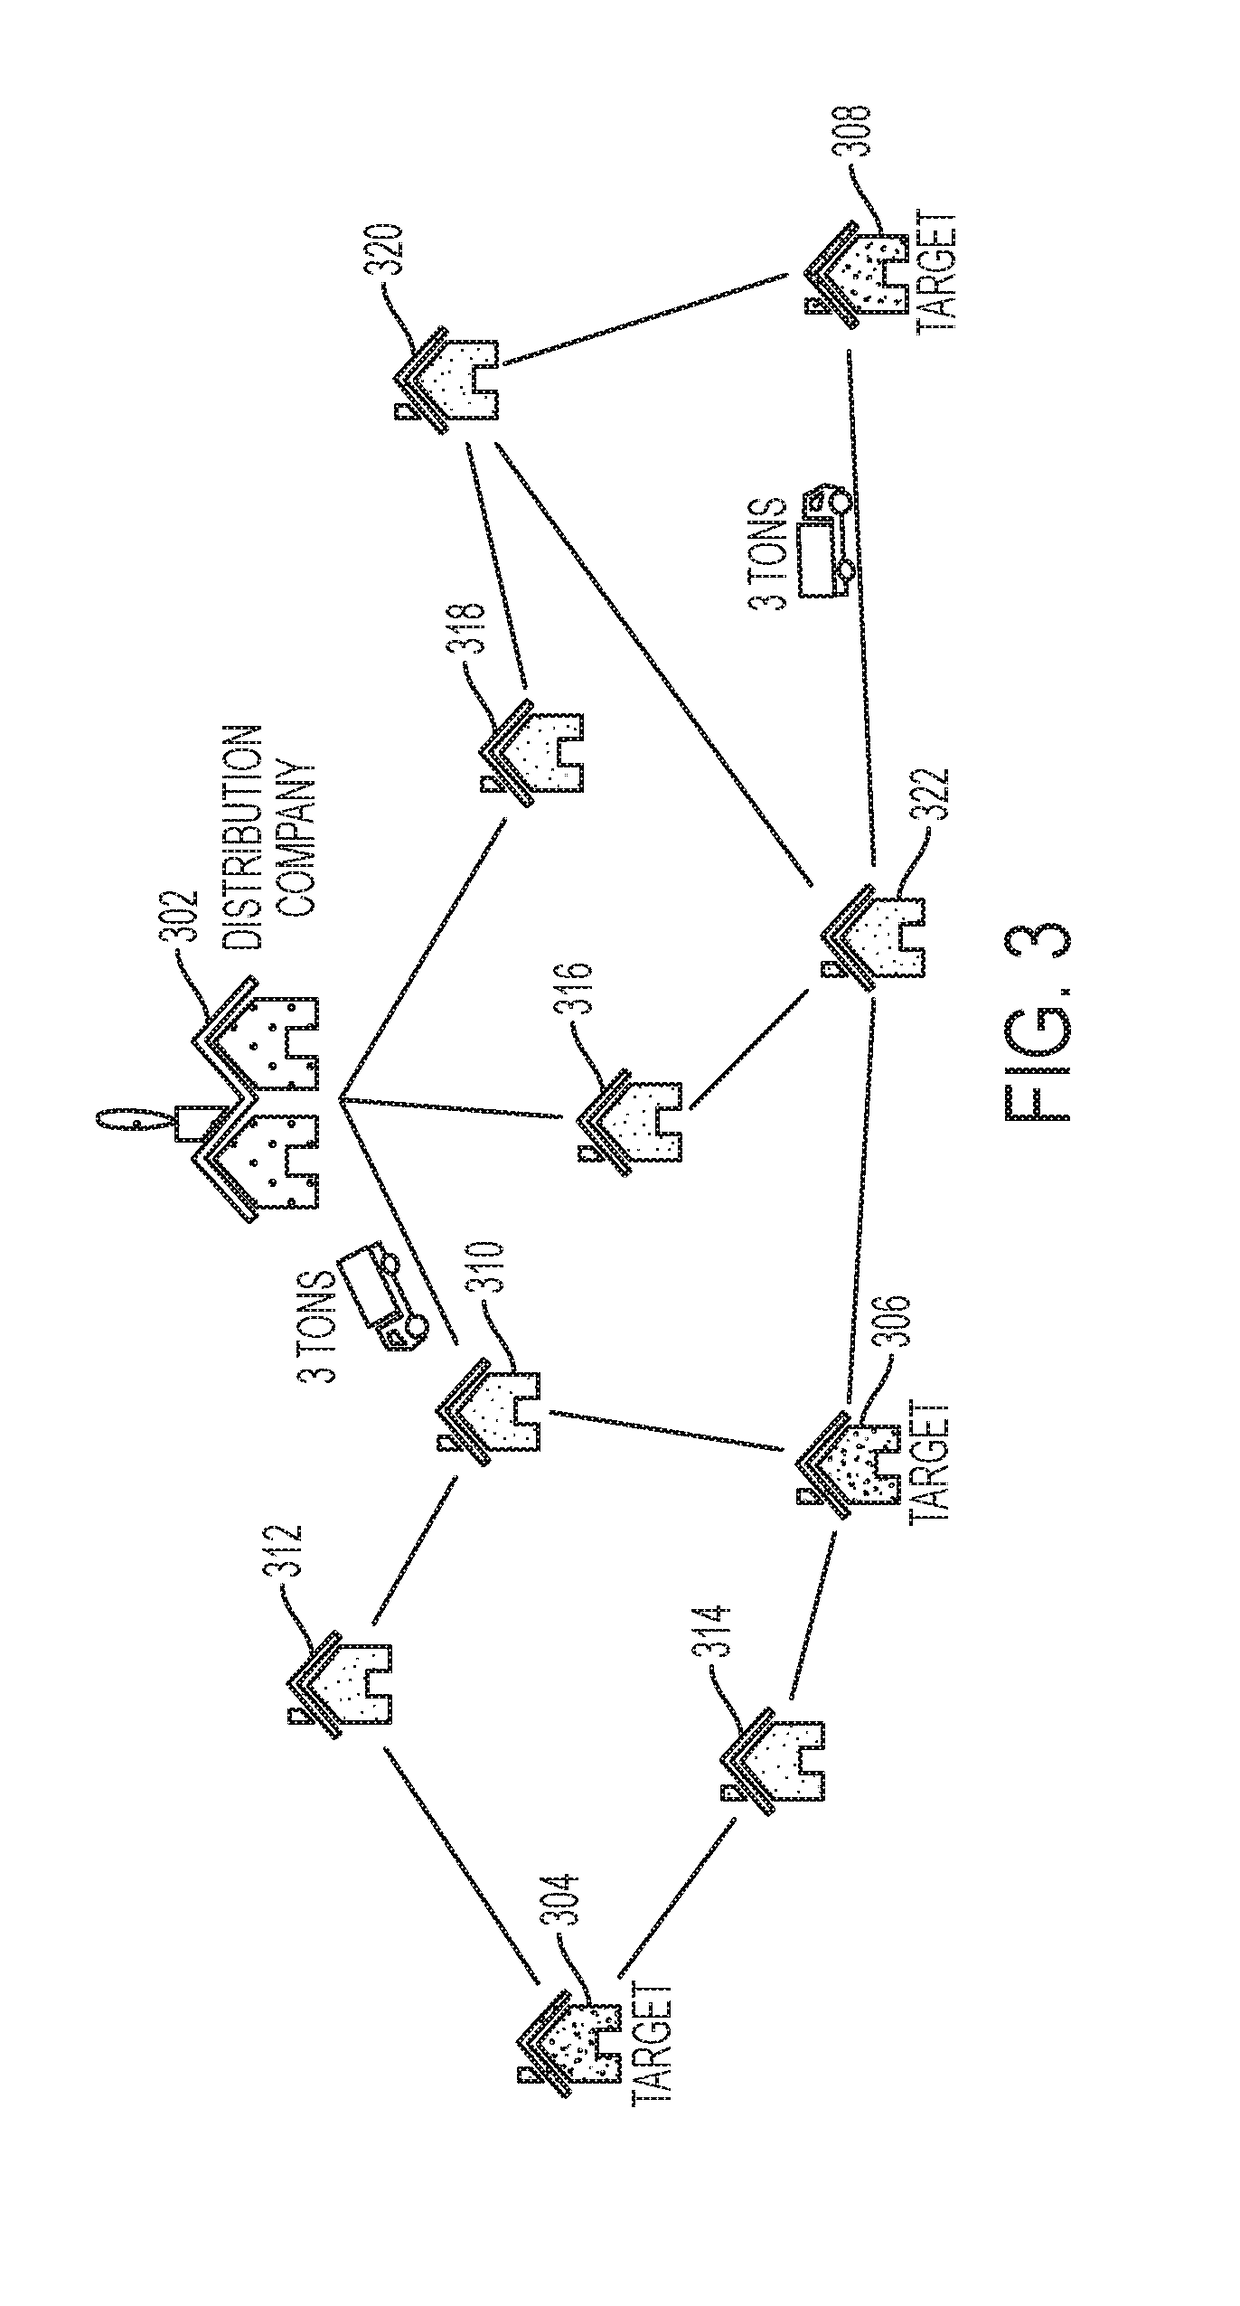 System and method for generating available ride-share paths in a transportation network